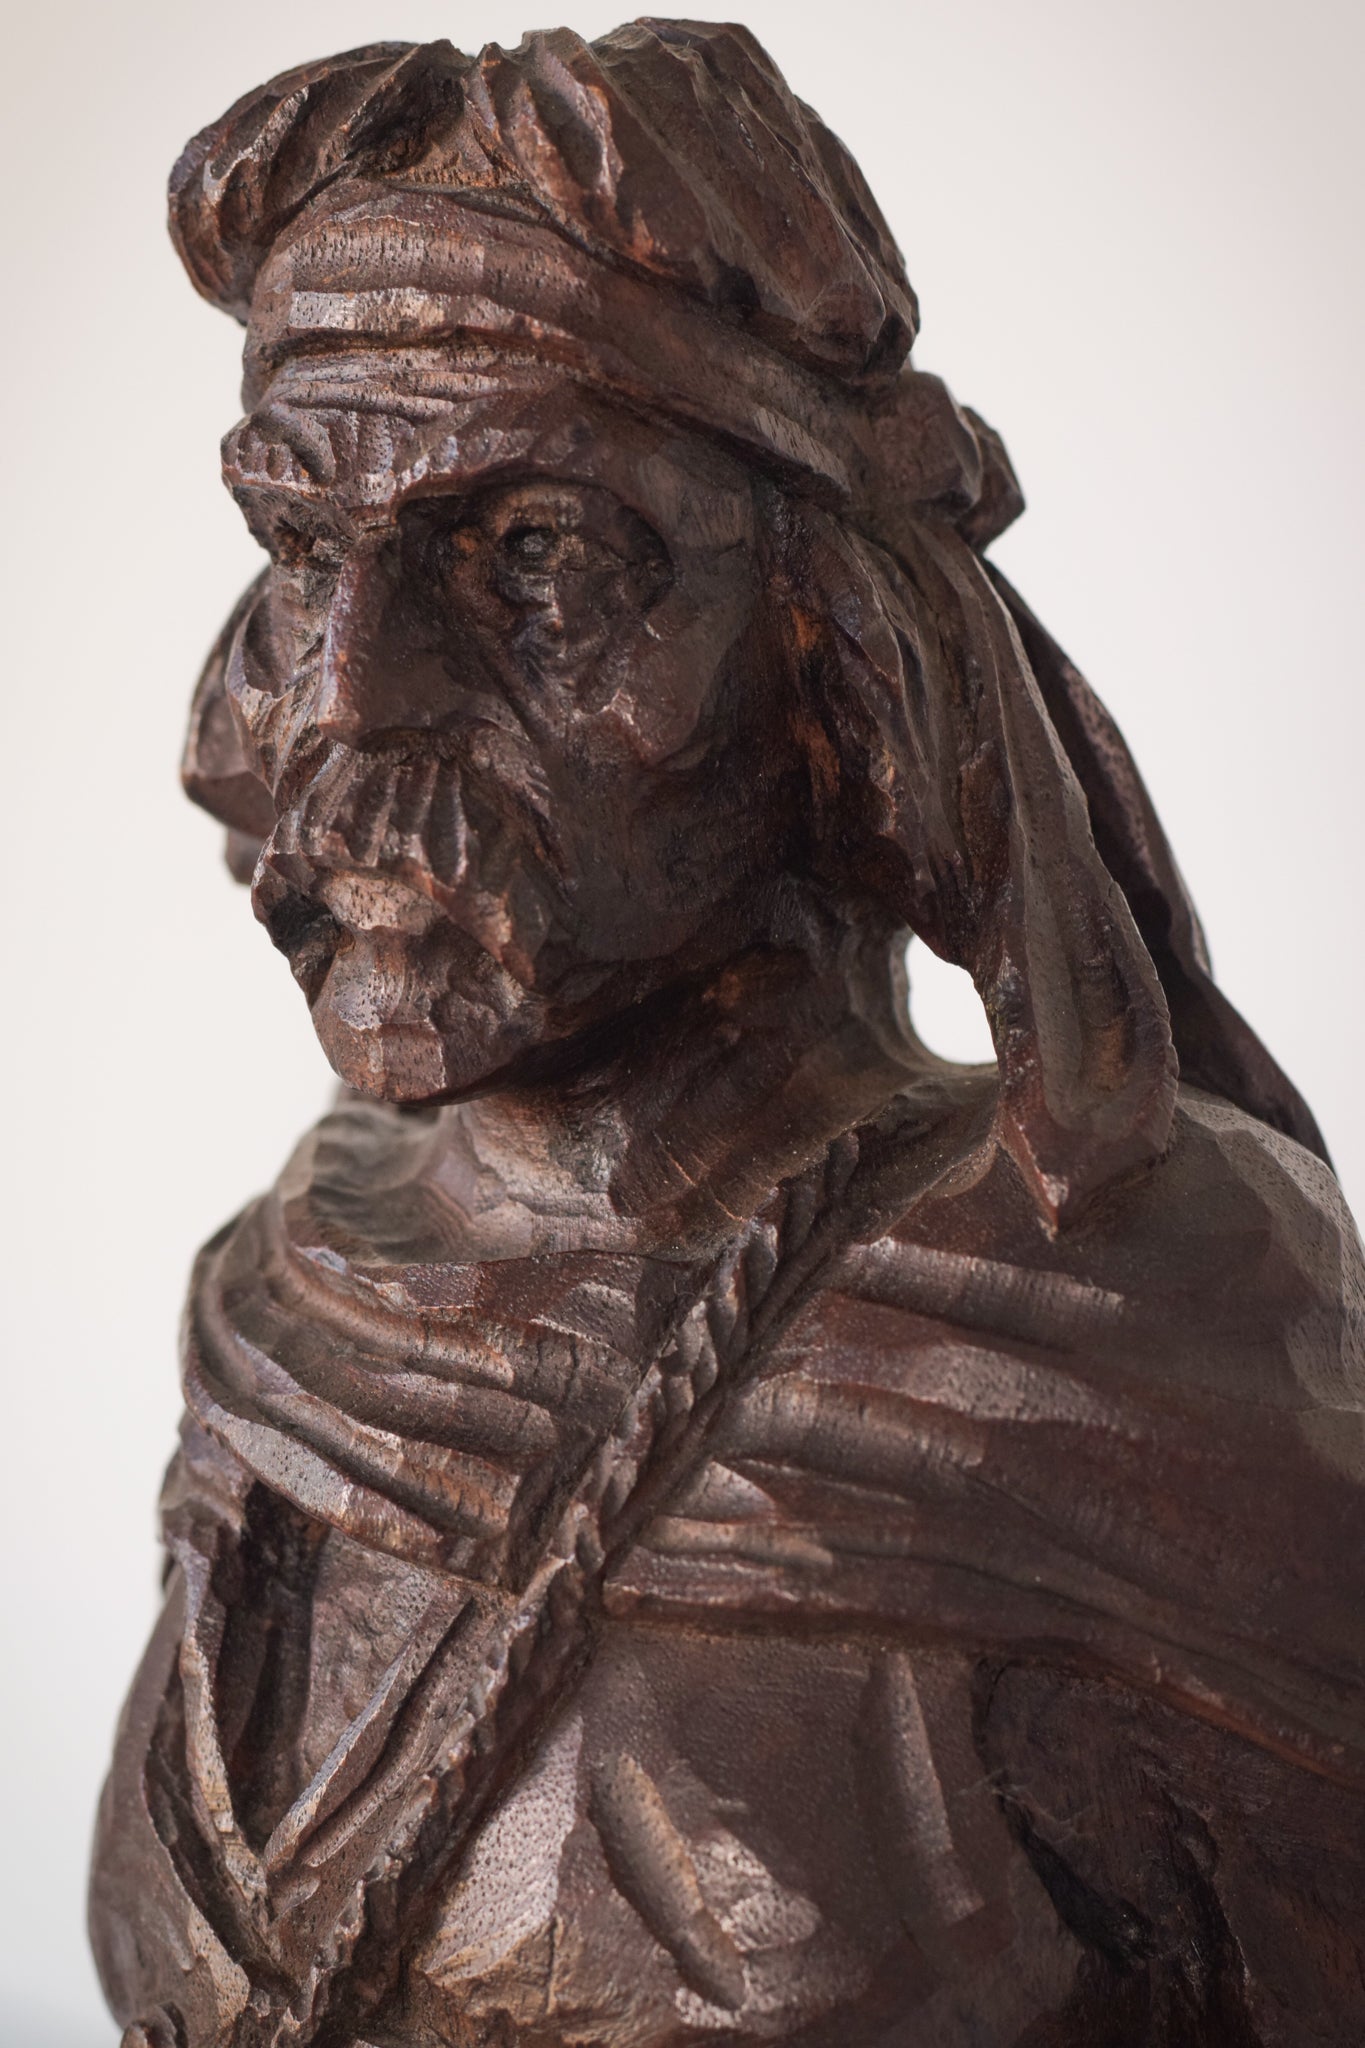 Hand Carved Wooden Sculpture of a Male Figure